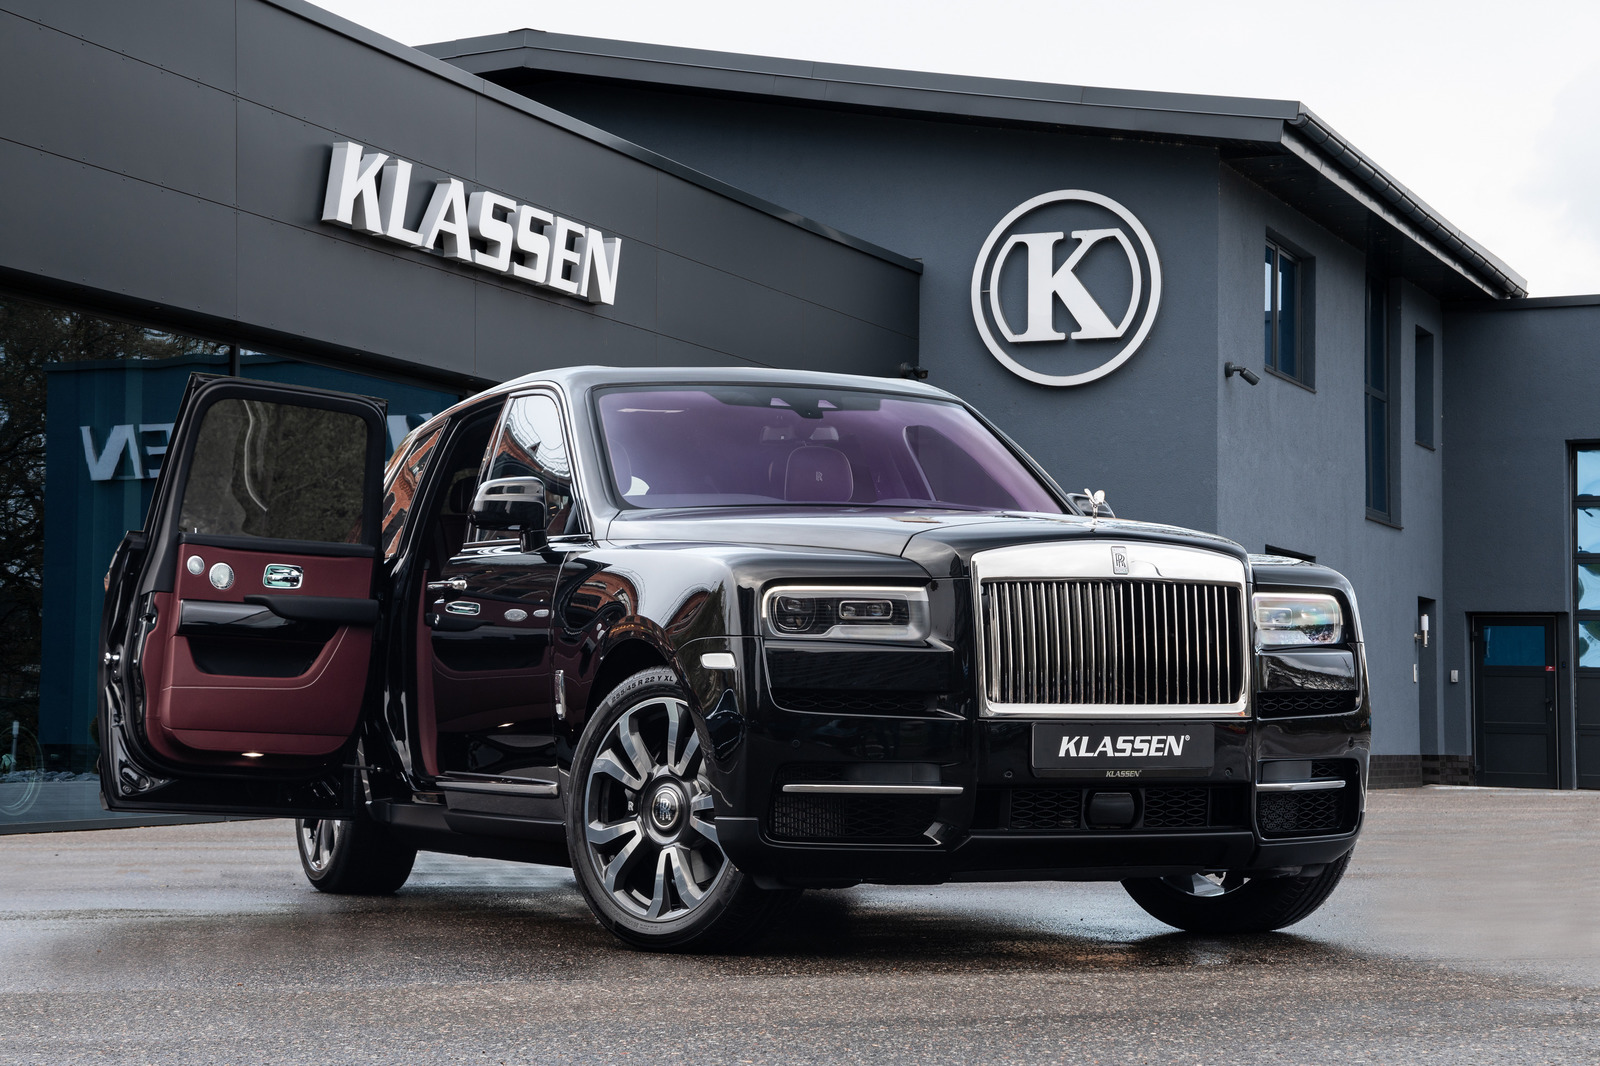 bao drake surprised the world by giving mike tyson his rolls royce cullinan when hiring him as his bodyguard and co star in his upcoming mv 65352e8c3d74a Drake Surprised The World By Giving Mike Tyson His Rolls-royce Cullinan When Hiring Him As His Bodyguard And Co-star In His Upcoming Mv.